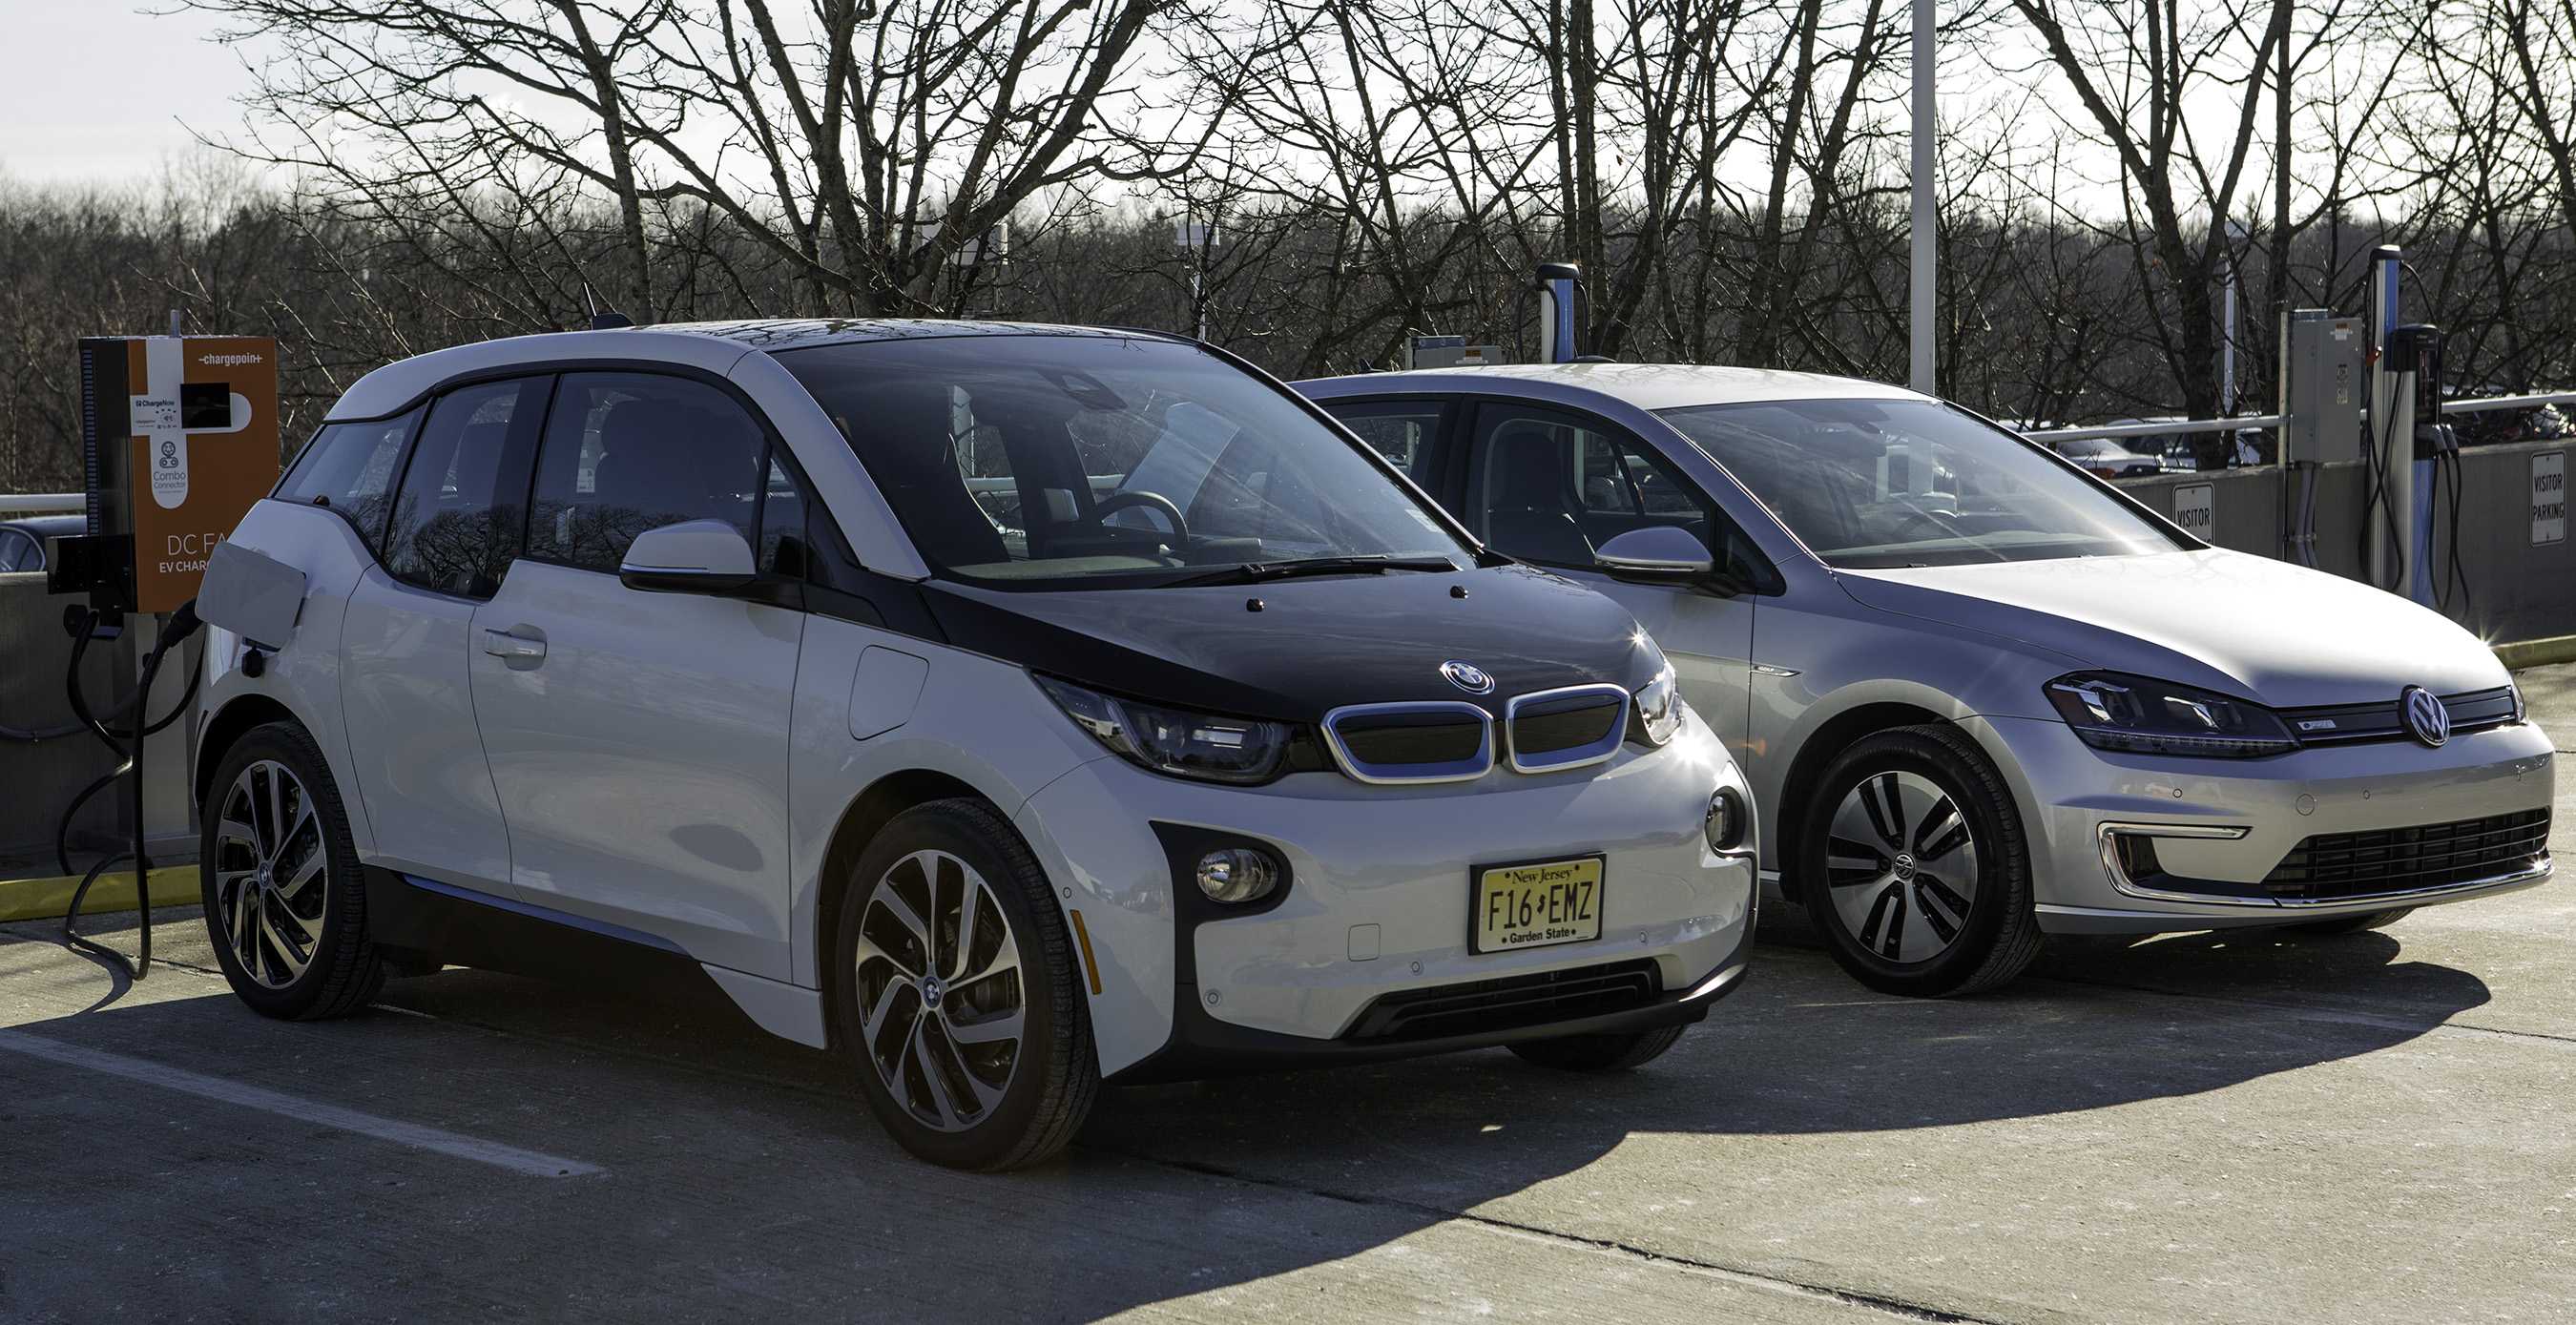 The BMW i3 and Volkswagen eGolf charge quickly using DC